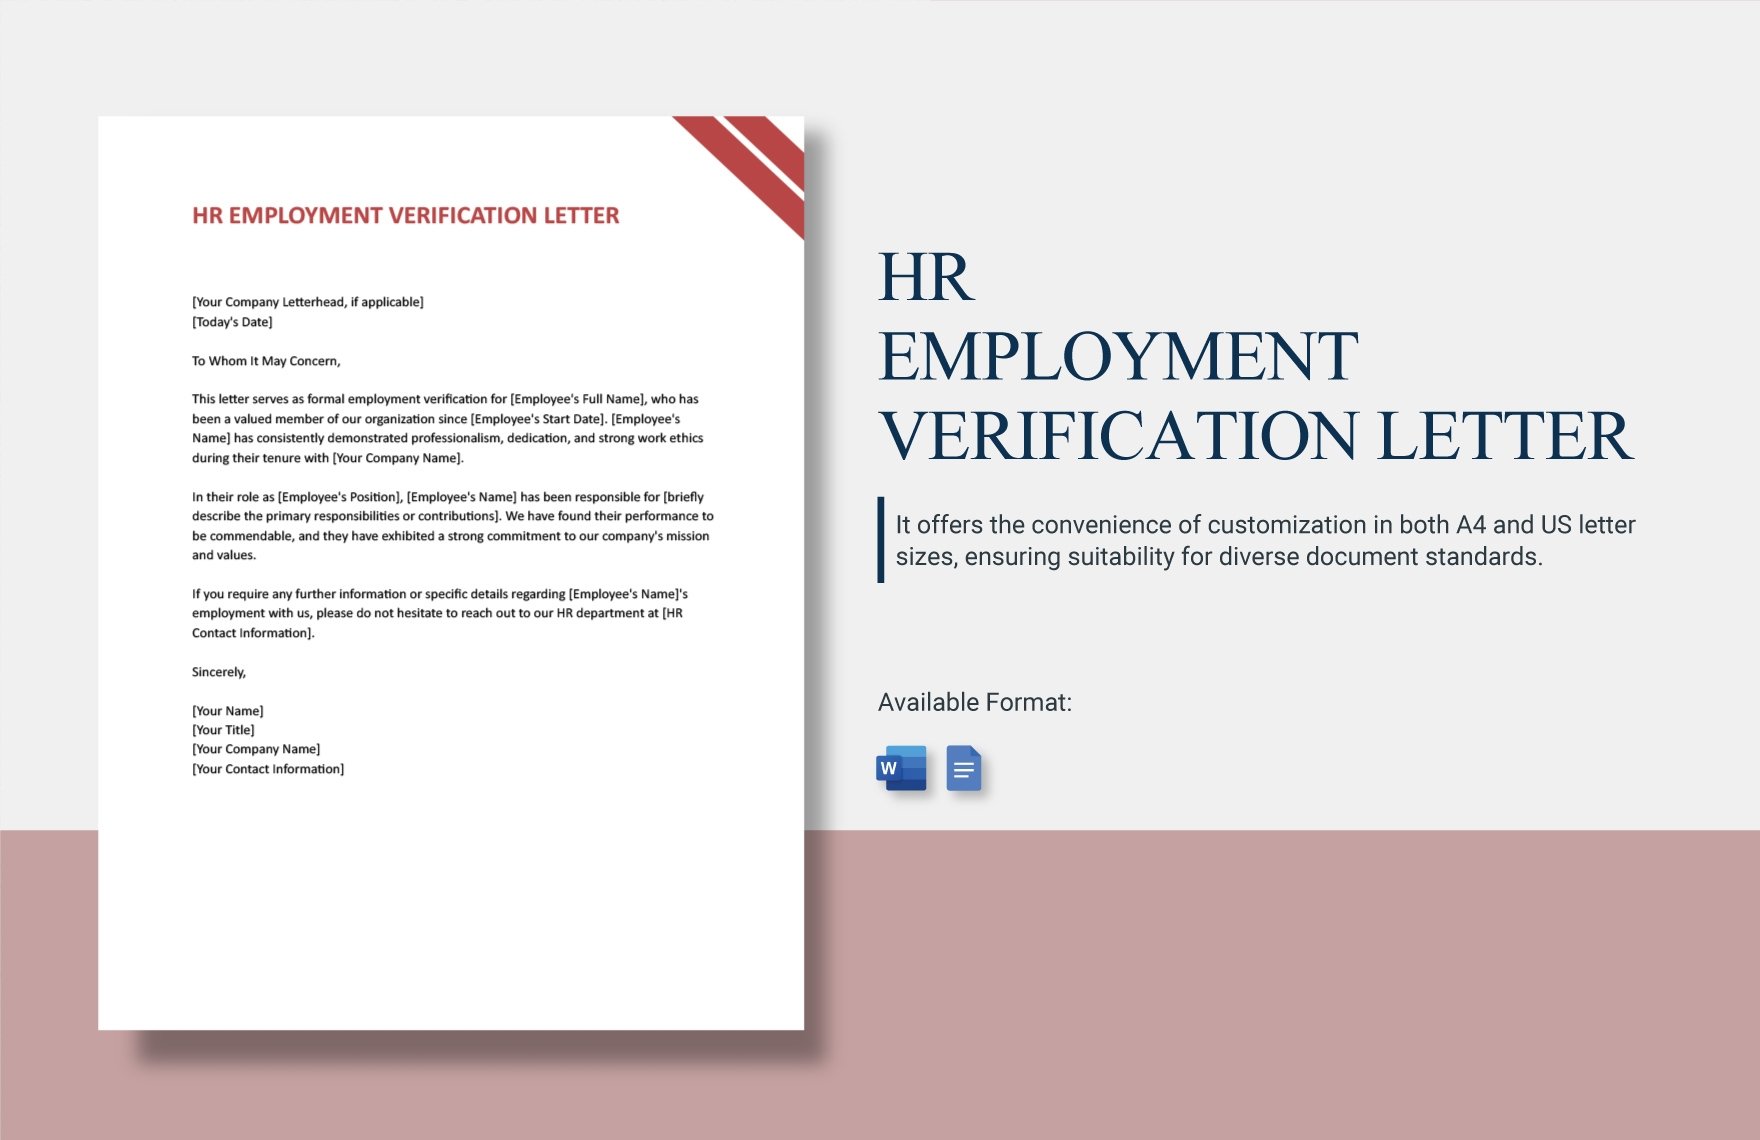 Free HR Employment Verification Letter in Word, Google Docs